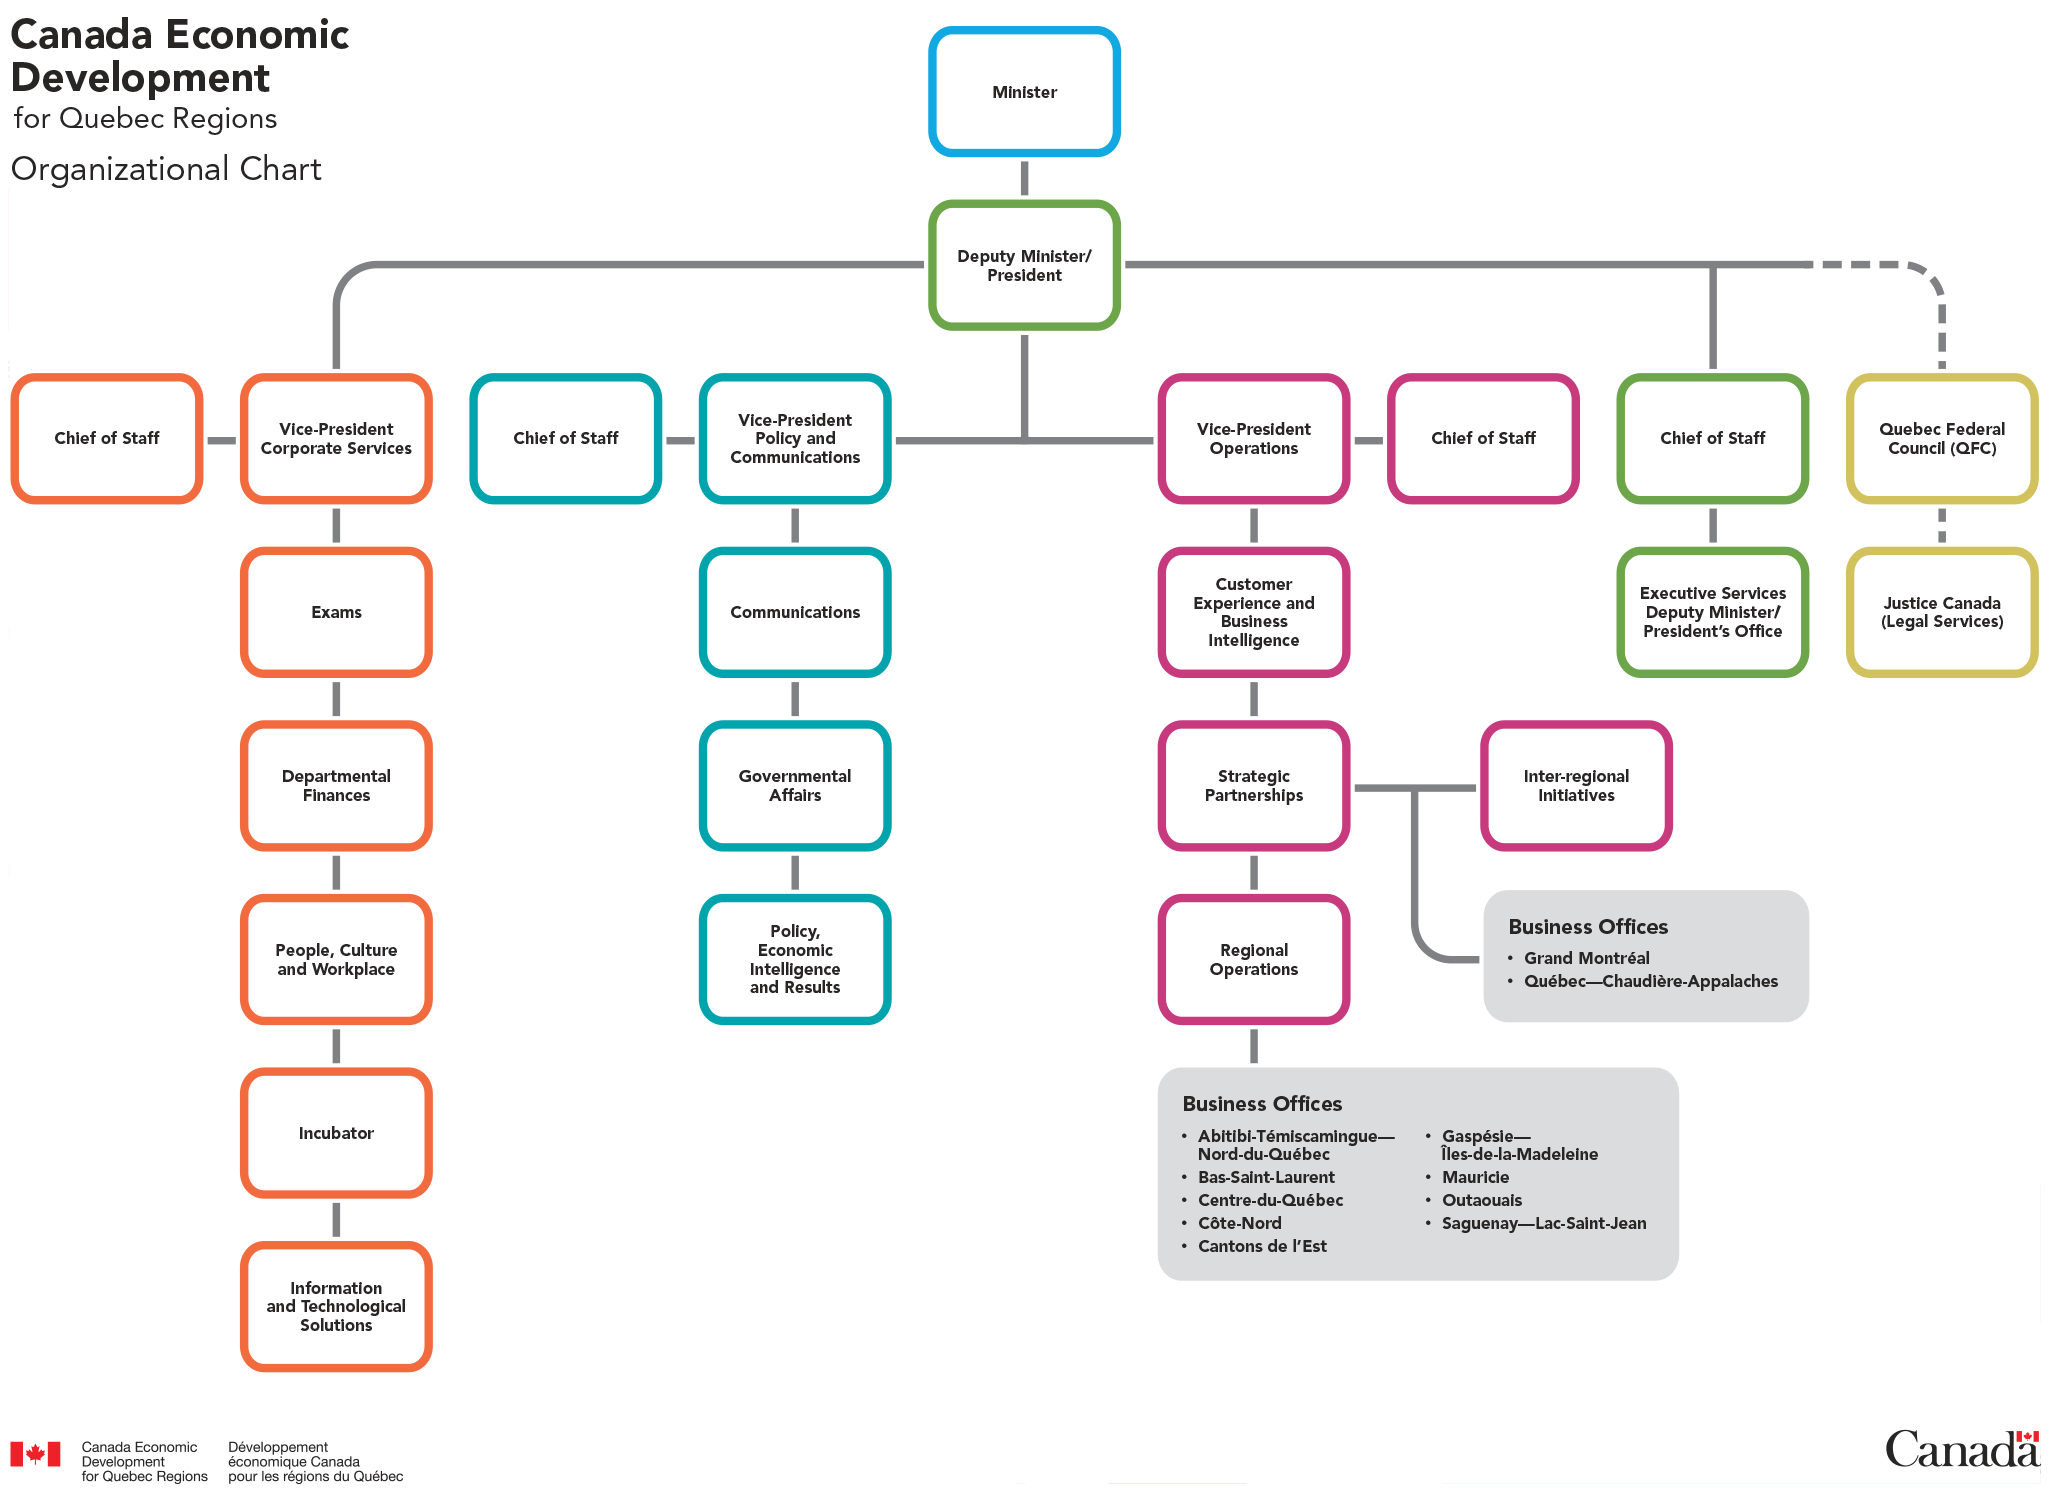 An organizational chart outlining CED’s organizational structure. At the top of the chart is the position of Minister, followed by Deputy Minister/President. In addition to her office’s Executive Services, three vice presidents come under the supervision of the Deputy Minister/President: Corporate Services, Policy and Communications, and Operations. Each of these four administrative units has a chief of staff. Under Corporate Services, there are five directorates: Exams; Departmental Finances; People, Culture and Workplace; Incubator; and Information and Technological Solutions. Under Policy and Communications, there are three directorates: Communications, Governmental Affairs, and Policy, Economic Intelligence and Results. Within the Operations Sector, there are several directorates: Customer Experience and Business Intelligence, Strategic Partnerships, Inter-regional Initiatives and Regional Operations. The business offices of Abitibi-Témiscamingue–Nord-du-Québec, Bas-St-Laurent, Centre-du-Québec, Côte-Nord, Cantons-de-l’Est, Gaspésie–Îles-de-la-Madeleine, Mauricie, Outaouais and Saguenay–Lac-St-Jean fall under Regional Operations, while the business offices of Grand Montréal and Québec–Chaudière-Appalaches fall jointly under Strategic Partnerships and Inter-regional Initiatives. Through the Quebec Federal Council (QFC), CED collaborates with other federal departments with a presence in Quebec and also relies on the services of Justice Canada (for its Legal Services).